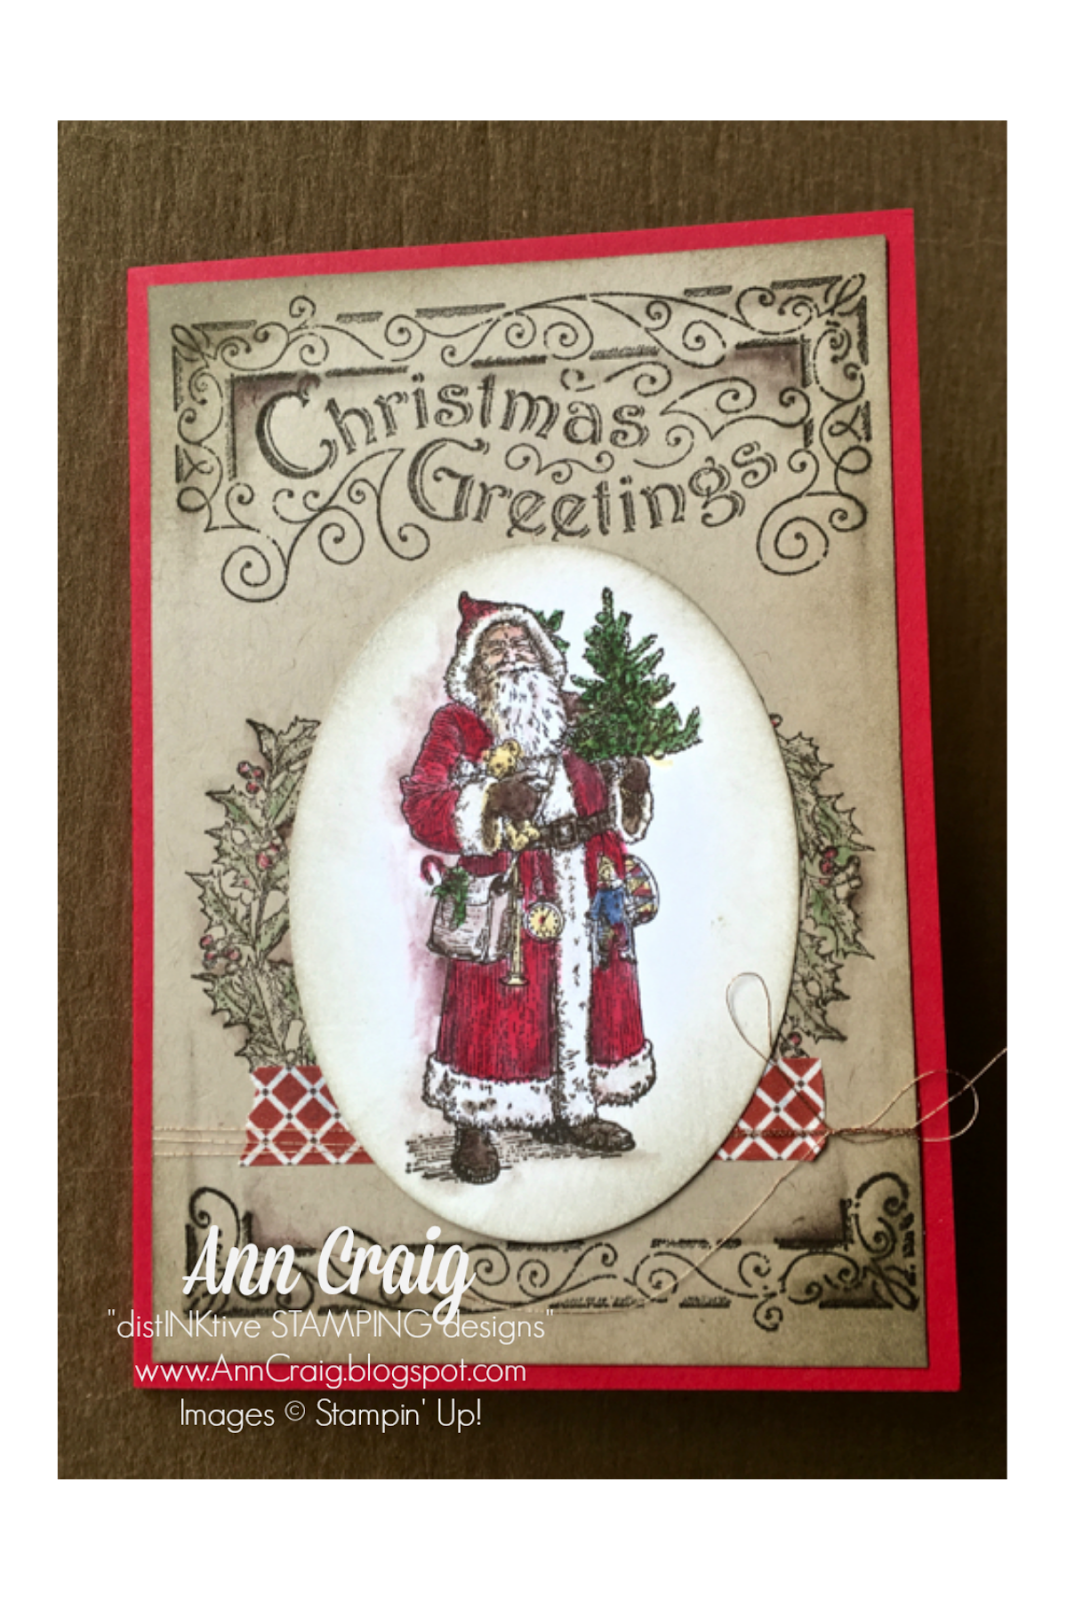 distINKtive STAMPING designs : Traditional Father Christmas Card